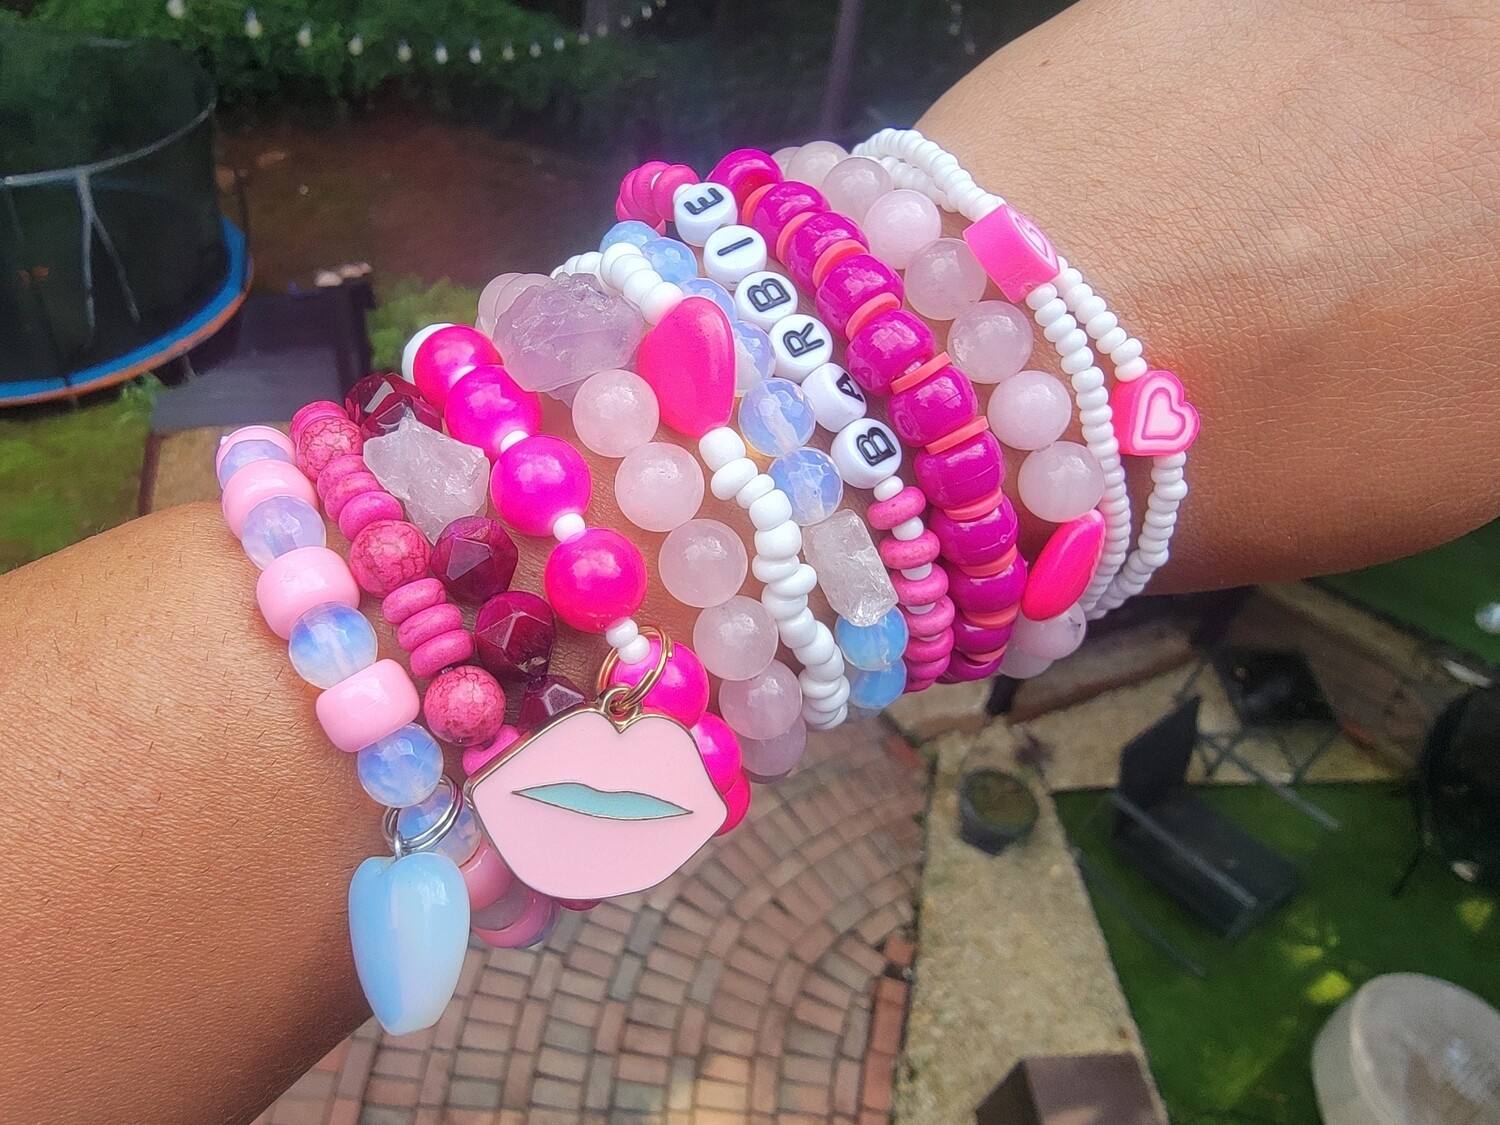 Barbie Girl limited edition bracelets a hot neon pink, white jade, opal, and pony beads hand made bracelets made with natural stones and a mix of fun beads.